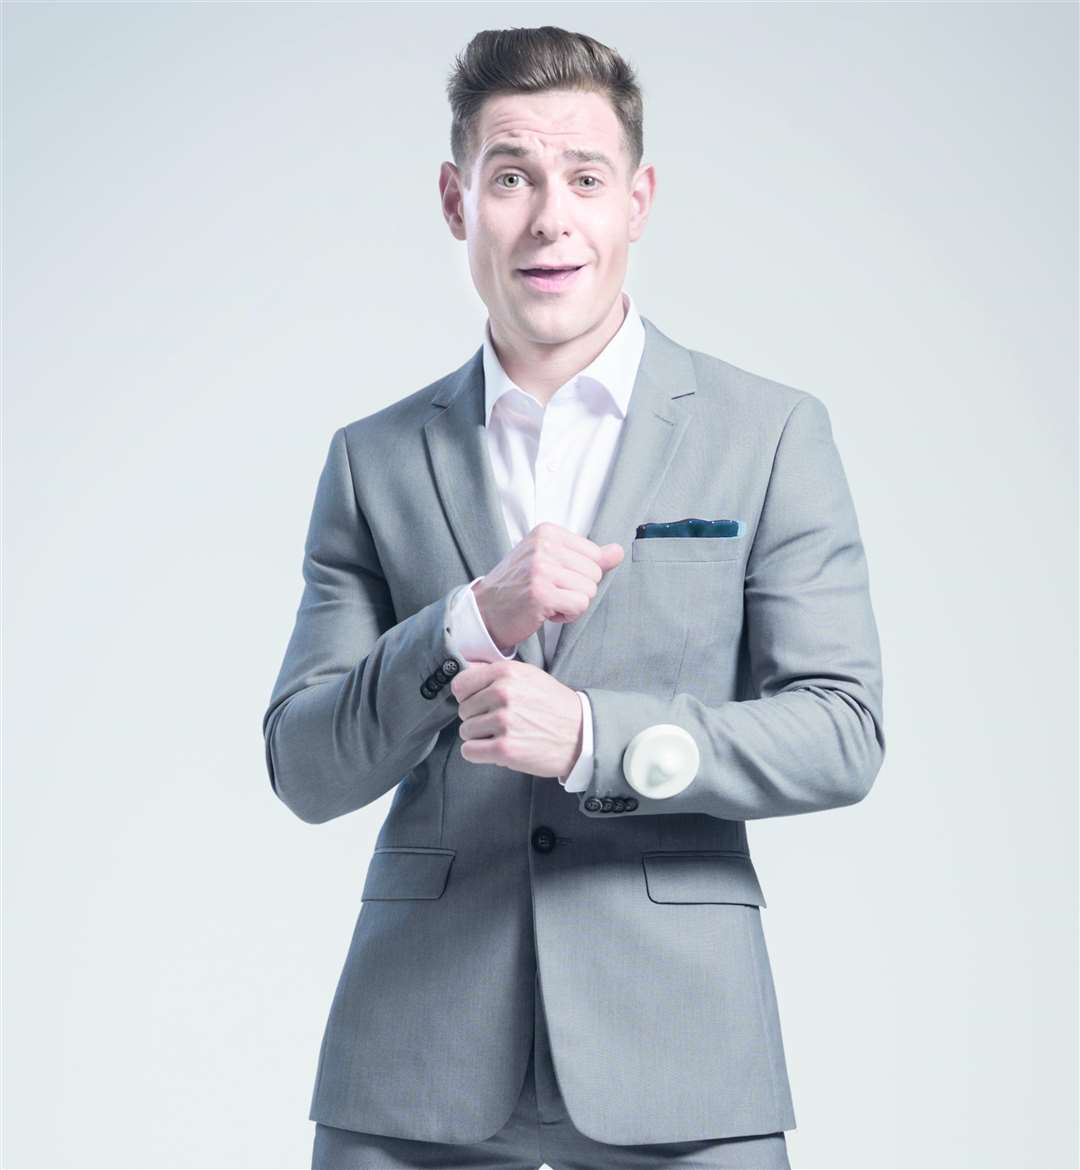 Lee Nelson will be at the Kent Comedy Festival in Maidstone